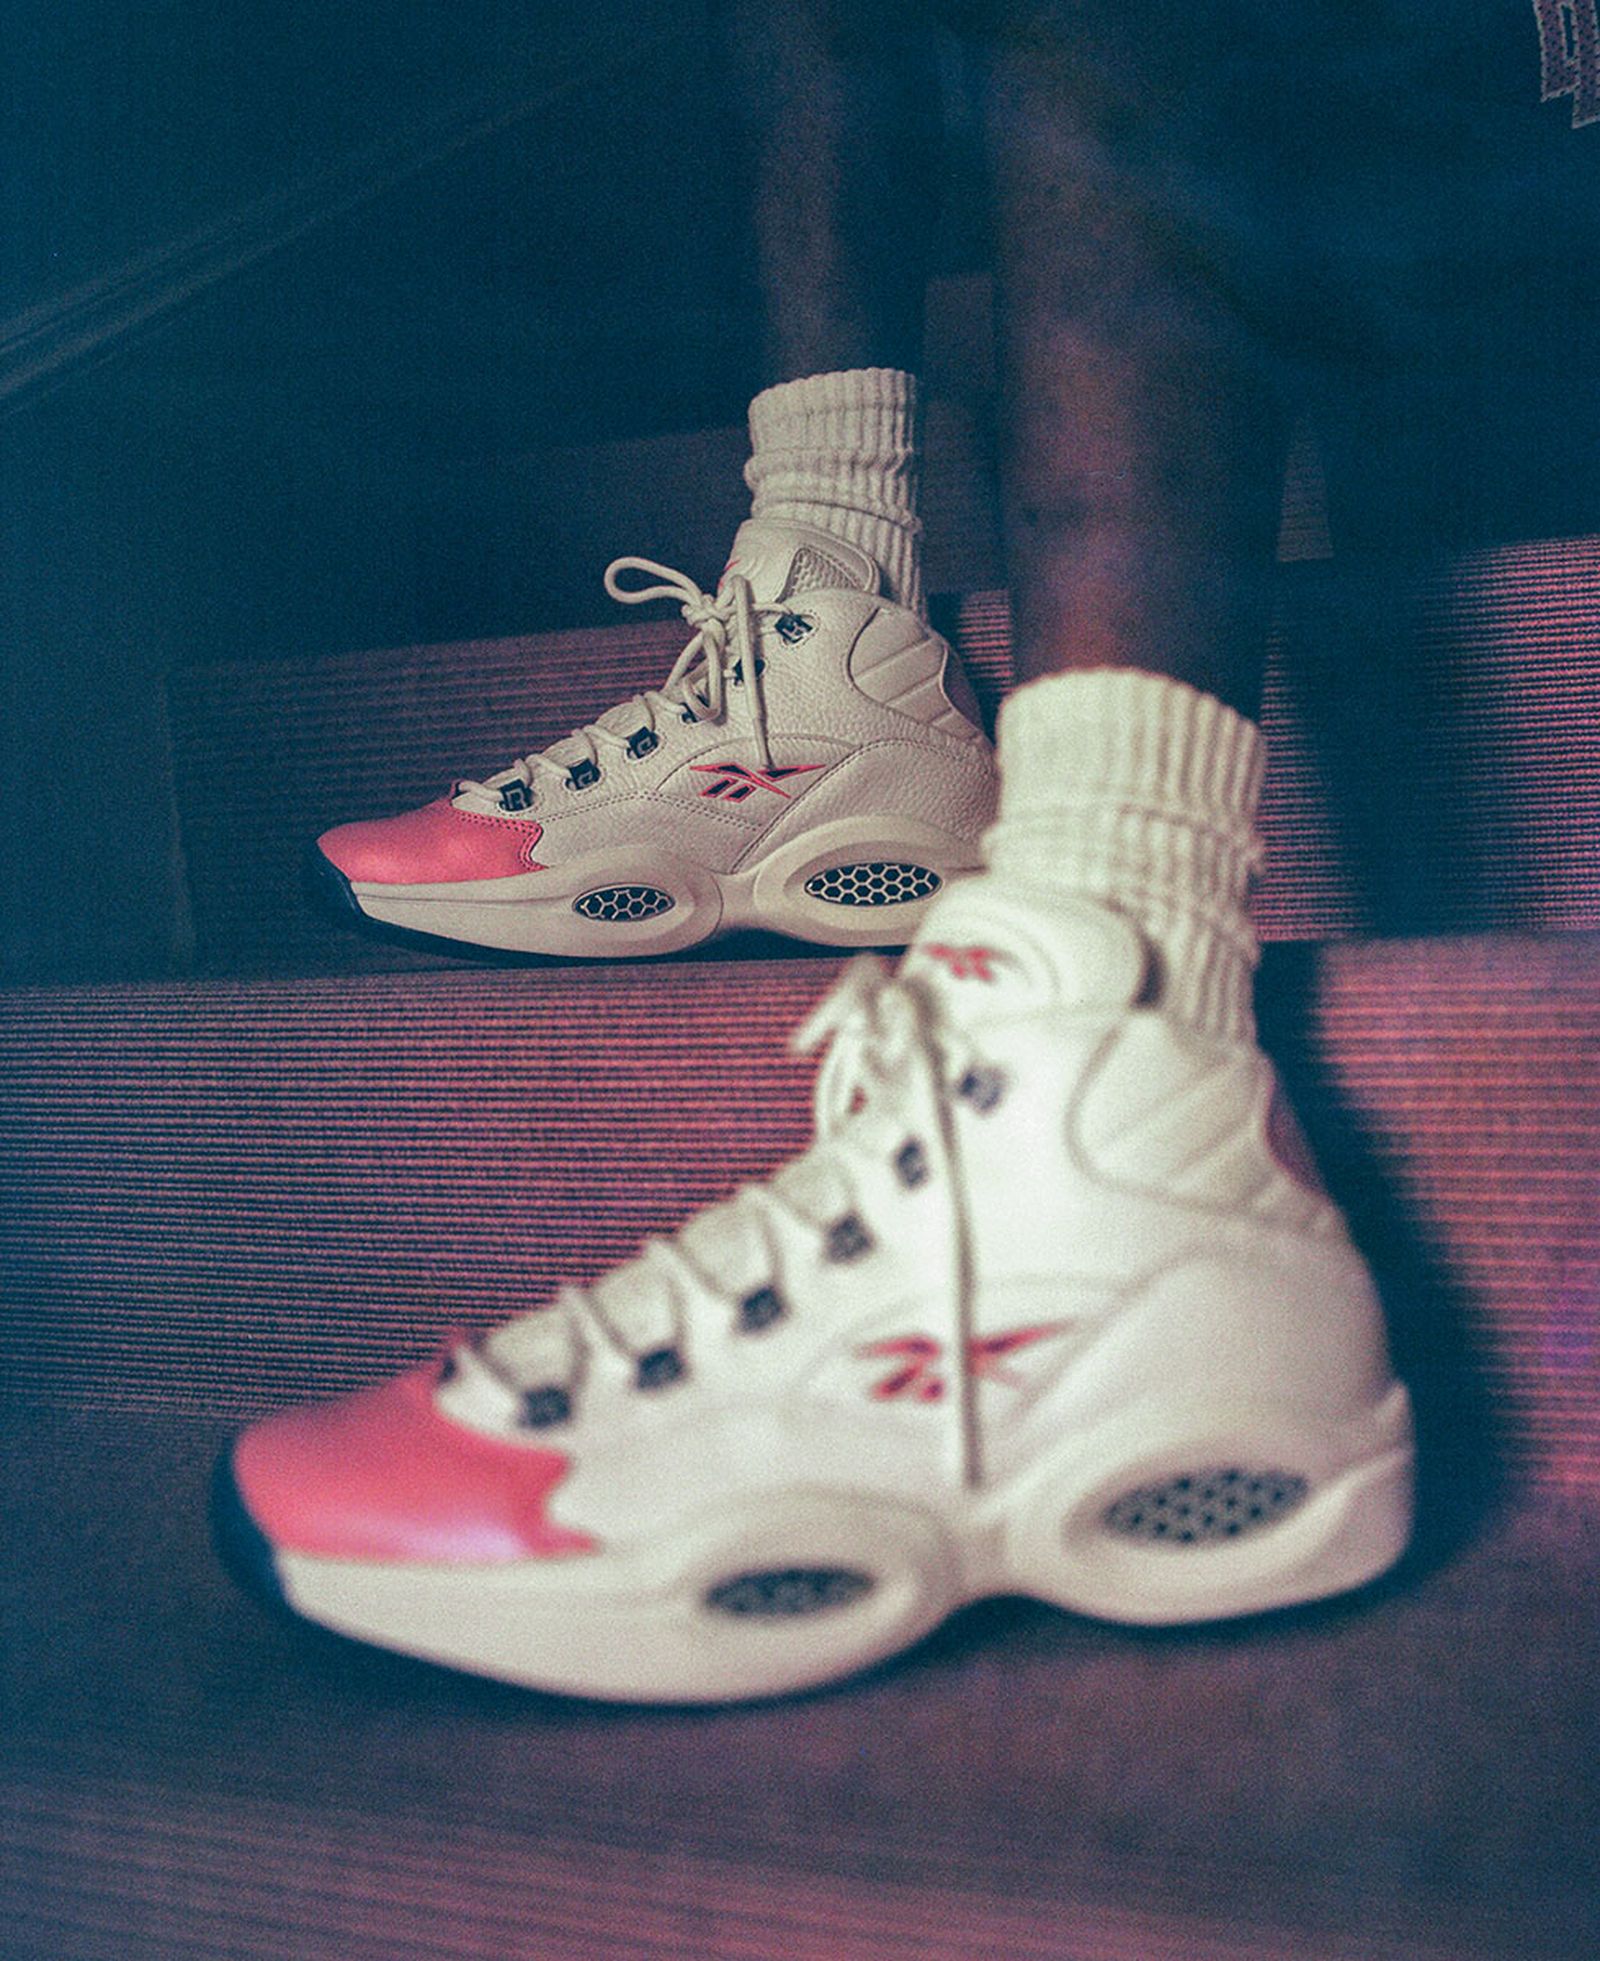 eric-emanuel-reebok-question-mid-release-date-price-03